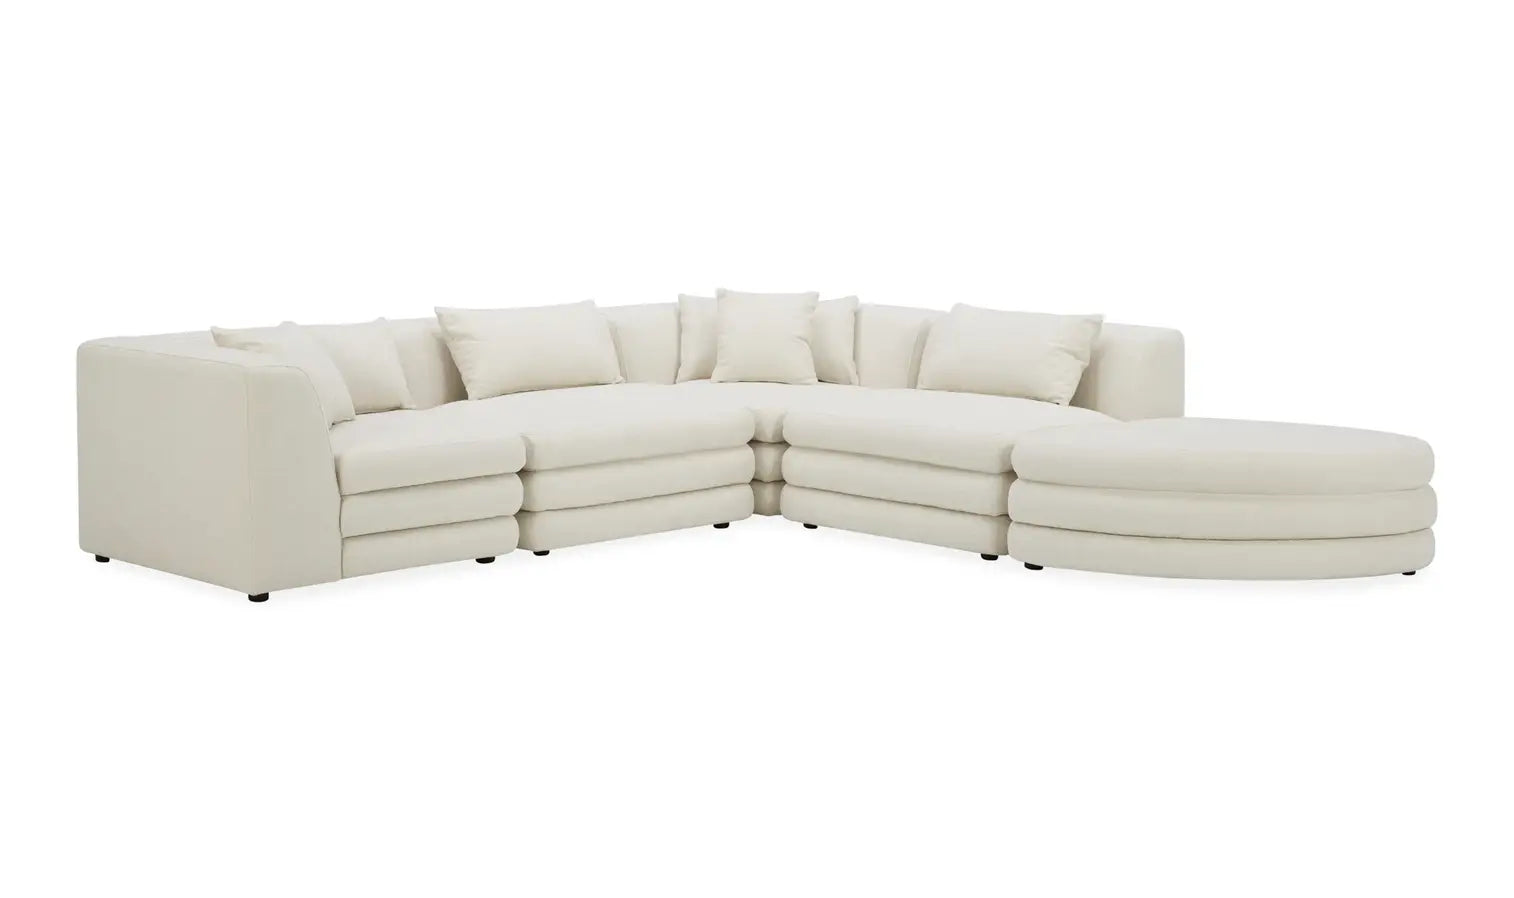 Lowtide Alcove Modular Sectional White Comfy & Modern-Stationary Sectionals-American Furniture Outlet